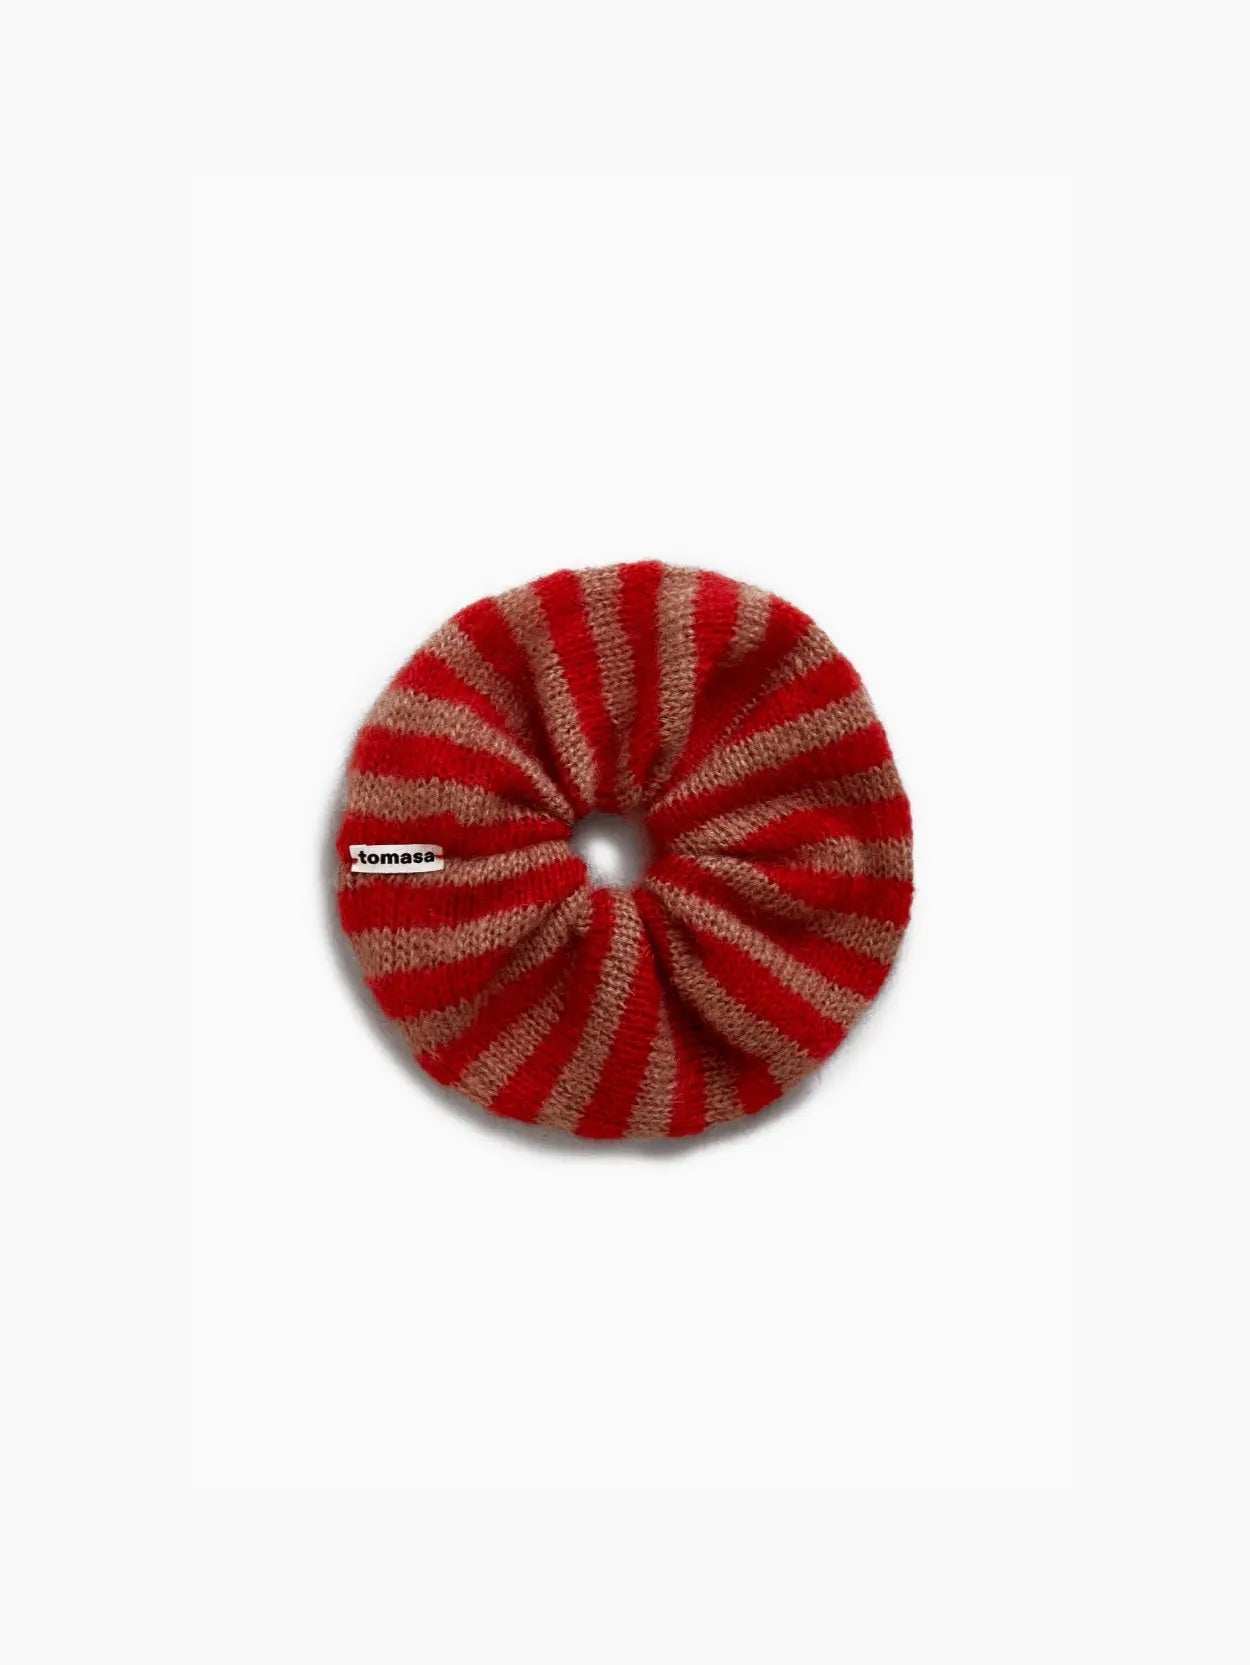 A round, knitted scrunchie with red and beige stripes is displayed against a plain white background. There is a small white tag with red and black writing attached to it. Shop the stylish Amapola Mohair Scrunchie by Tomasa at Bassalstore, your go-to store in Barcelona for unique finds.